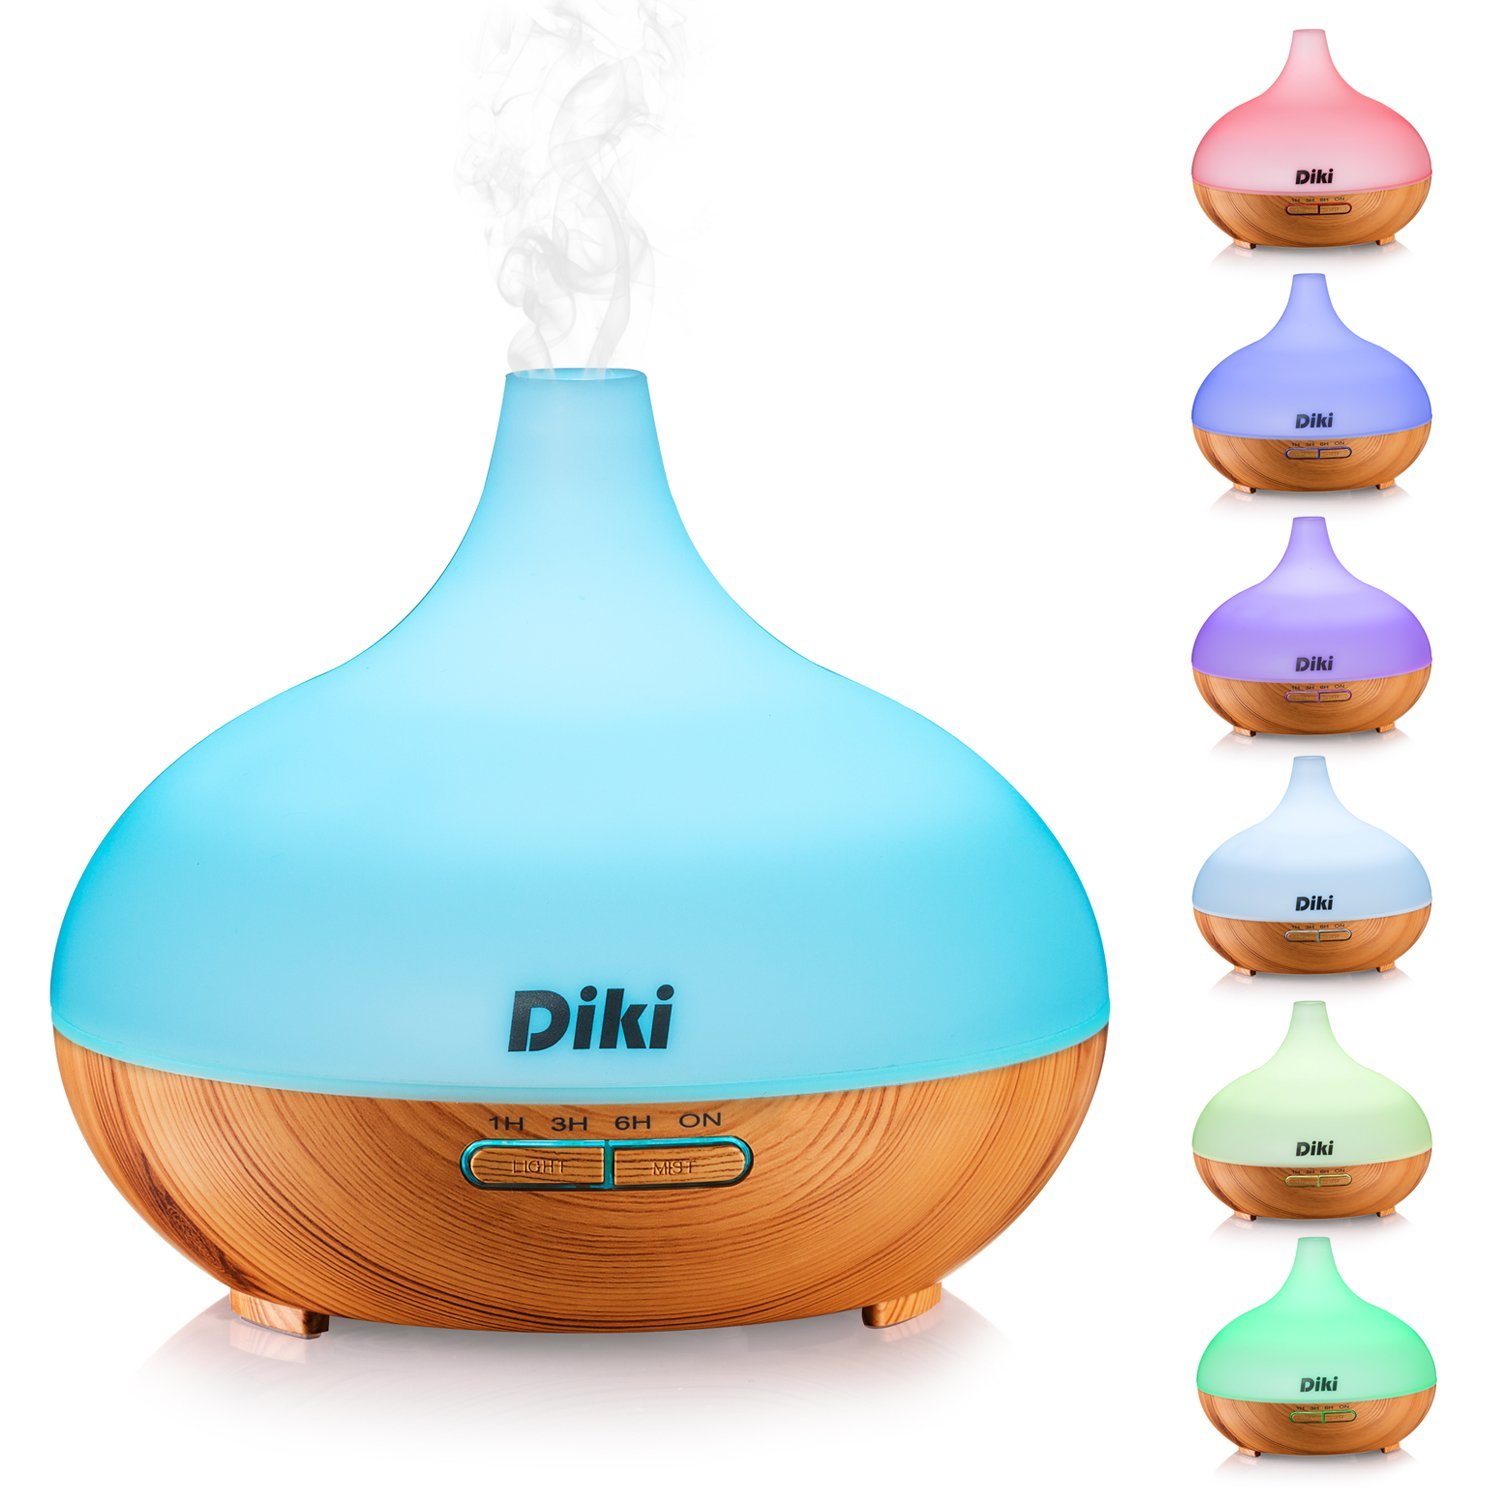 Essential Oil Diffuser DIKI Aroma Cool Mist Humidifier with 7 Color LED Lights Air Ultrasonic Purifiers Vaporizer 300ml Portable Aromatherapy for House Office Bedroom